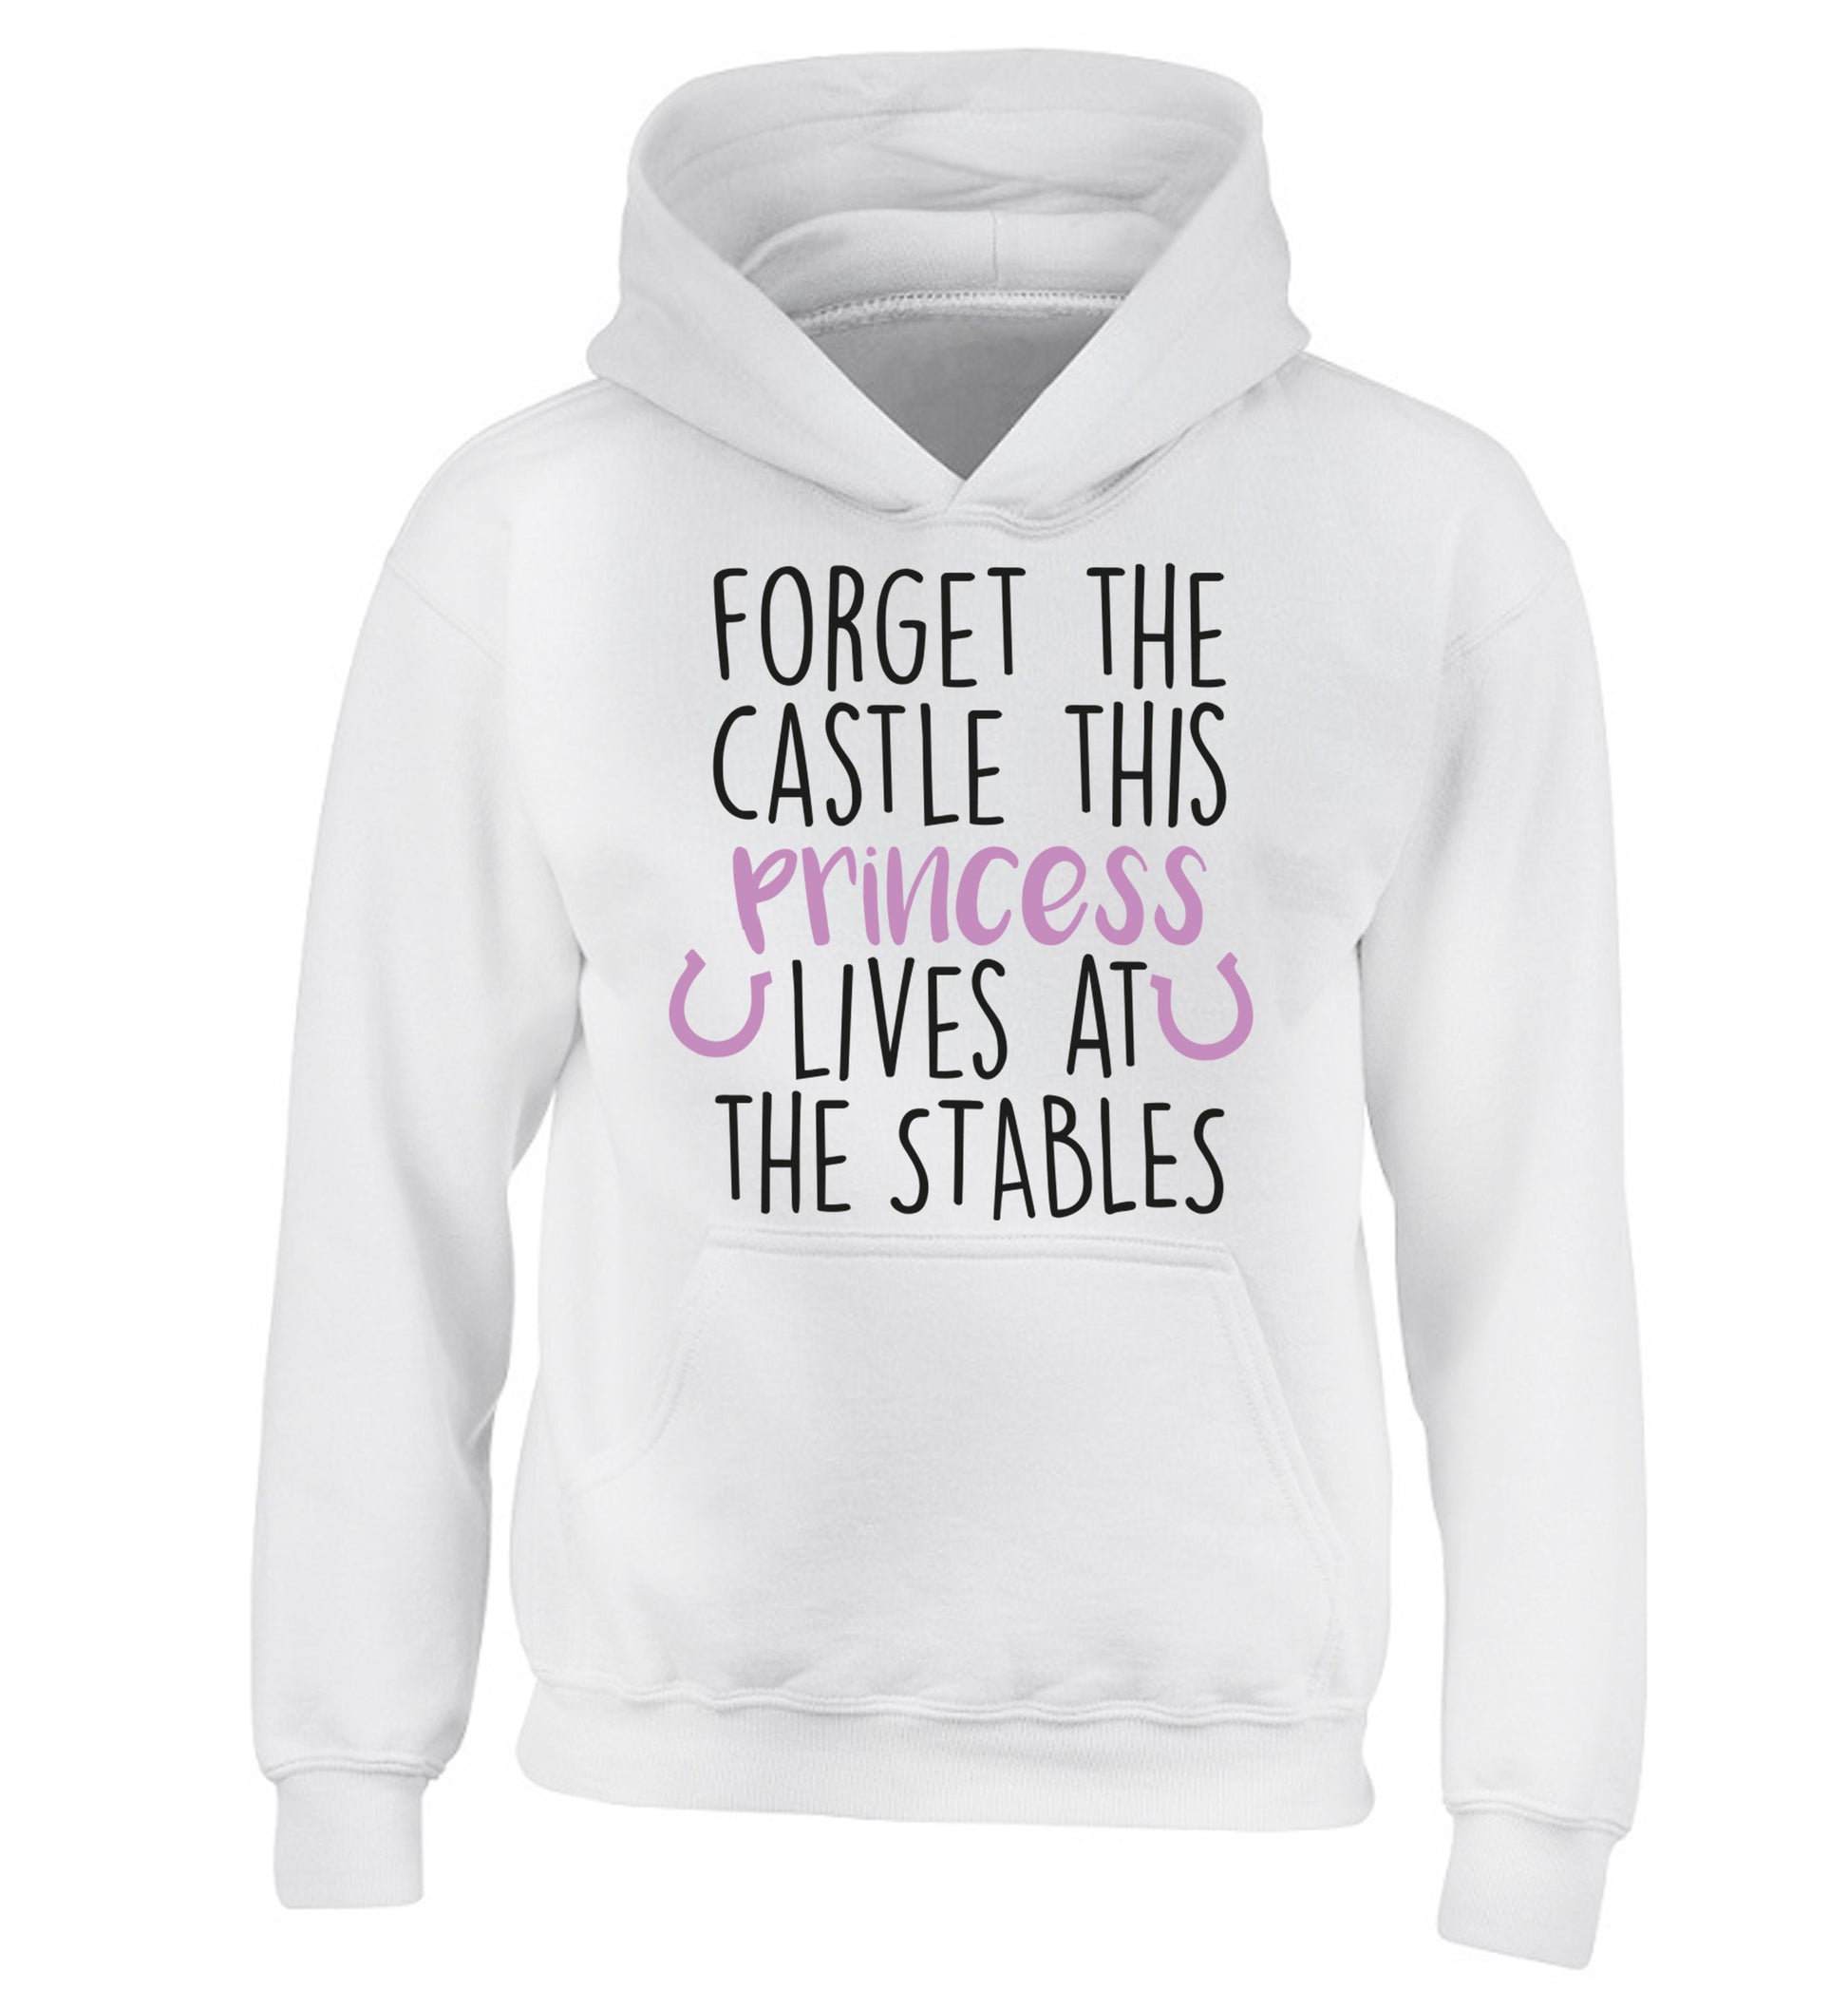 Forget the castle this princess lives at the stables children's white hoodie 12-14 Years